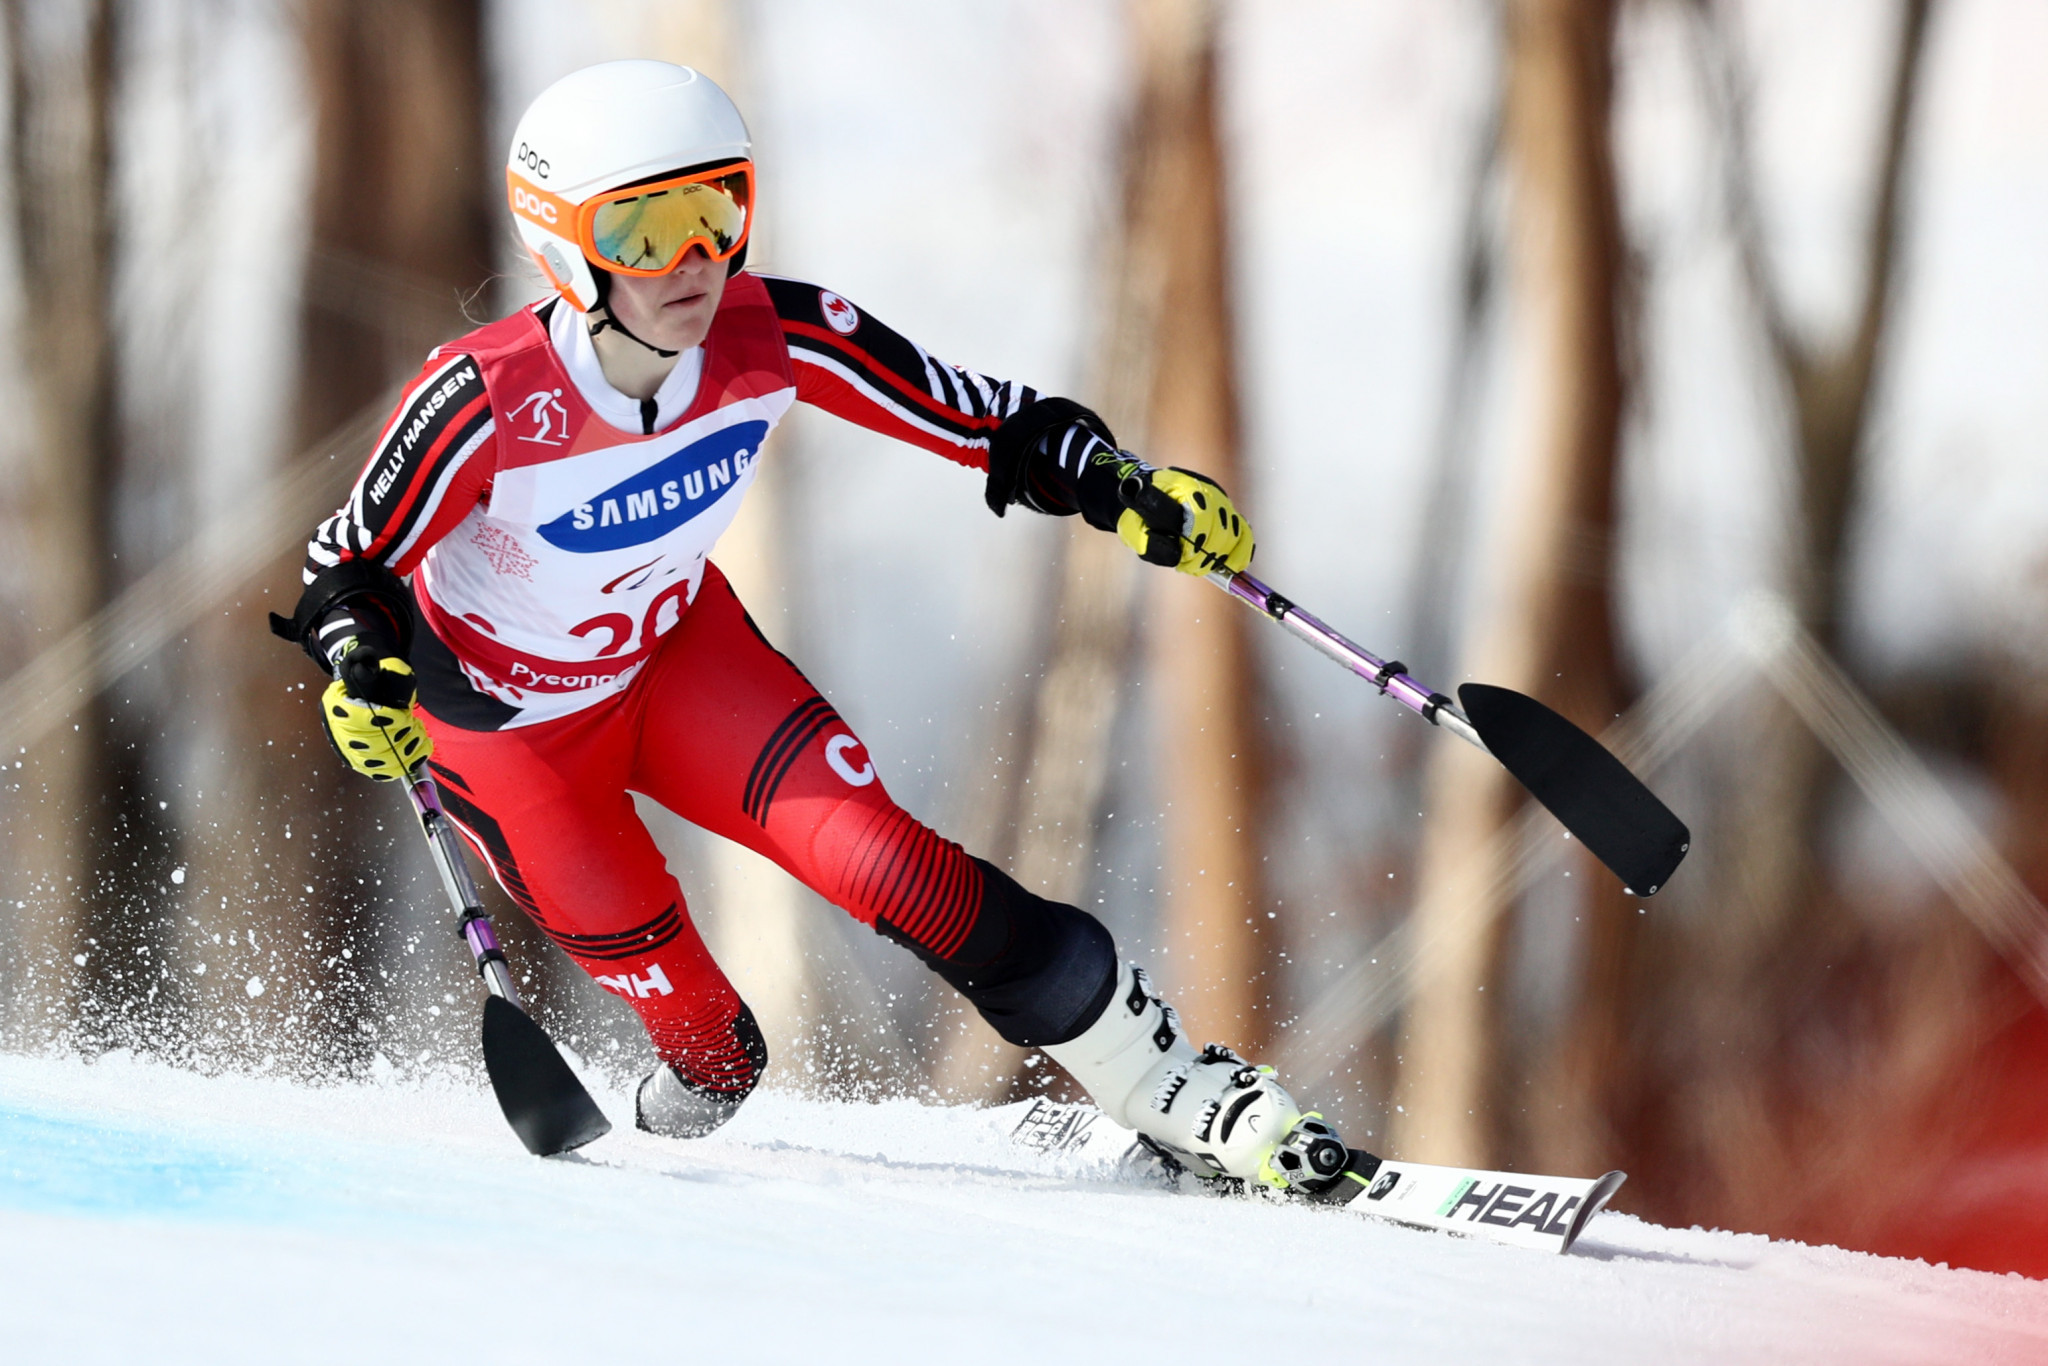 Canada’s Frédérique Turgeon earned her first-ever podium finish in the World Para Alpine Skiing World Cup by winning the women’s slalom standing event in Croatia's capital Zagreb ©Getty Images